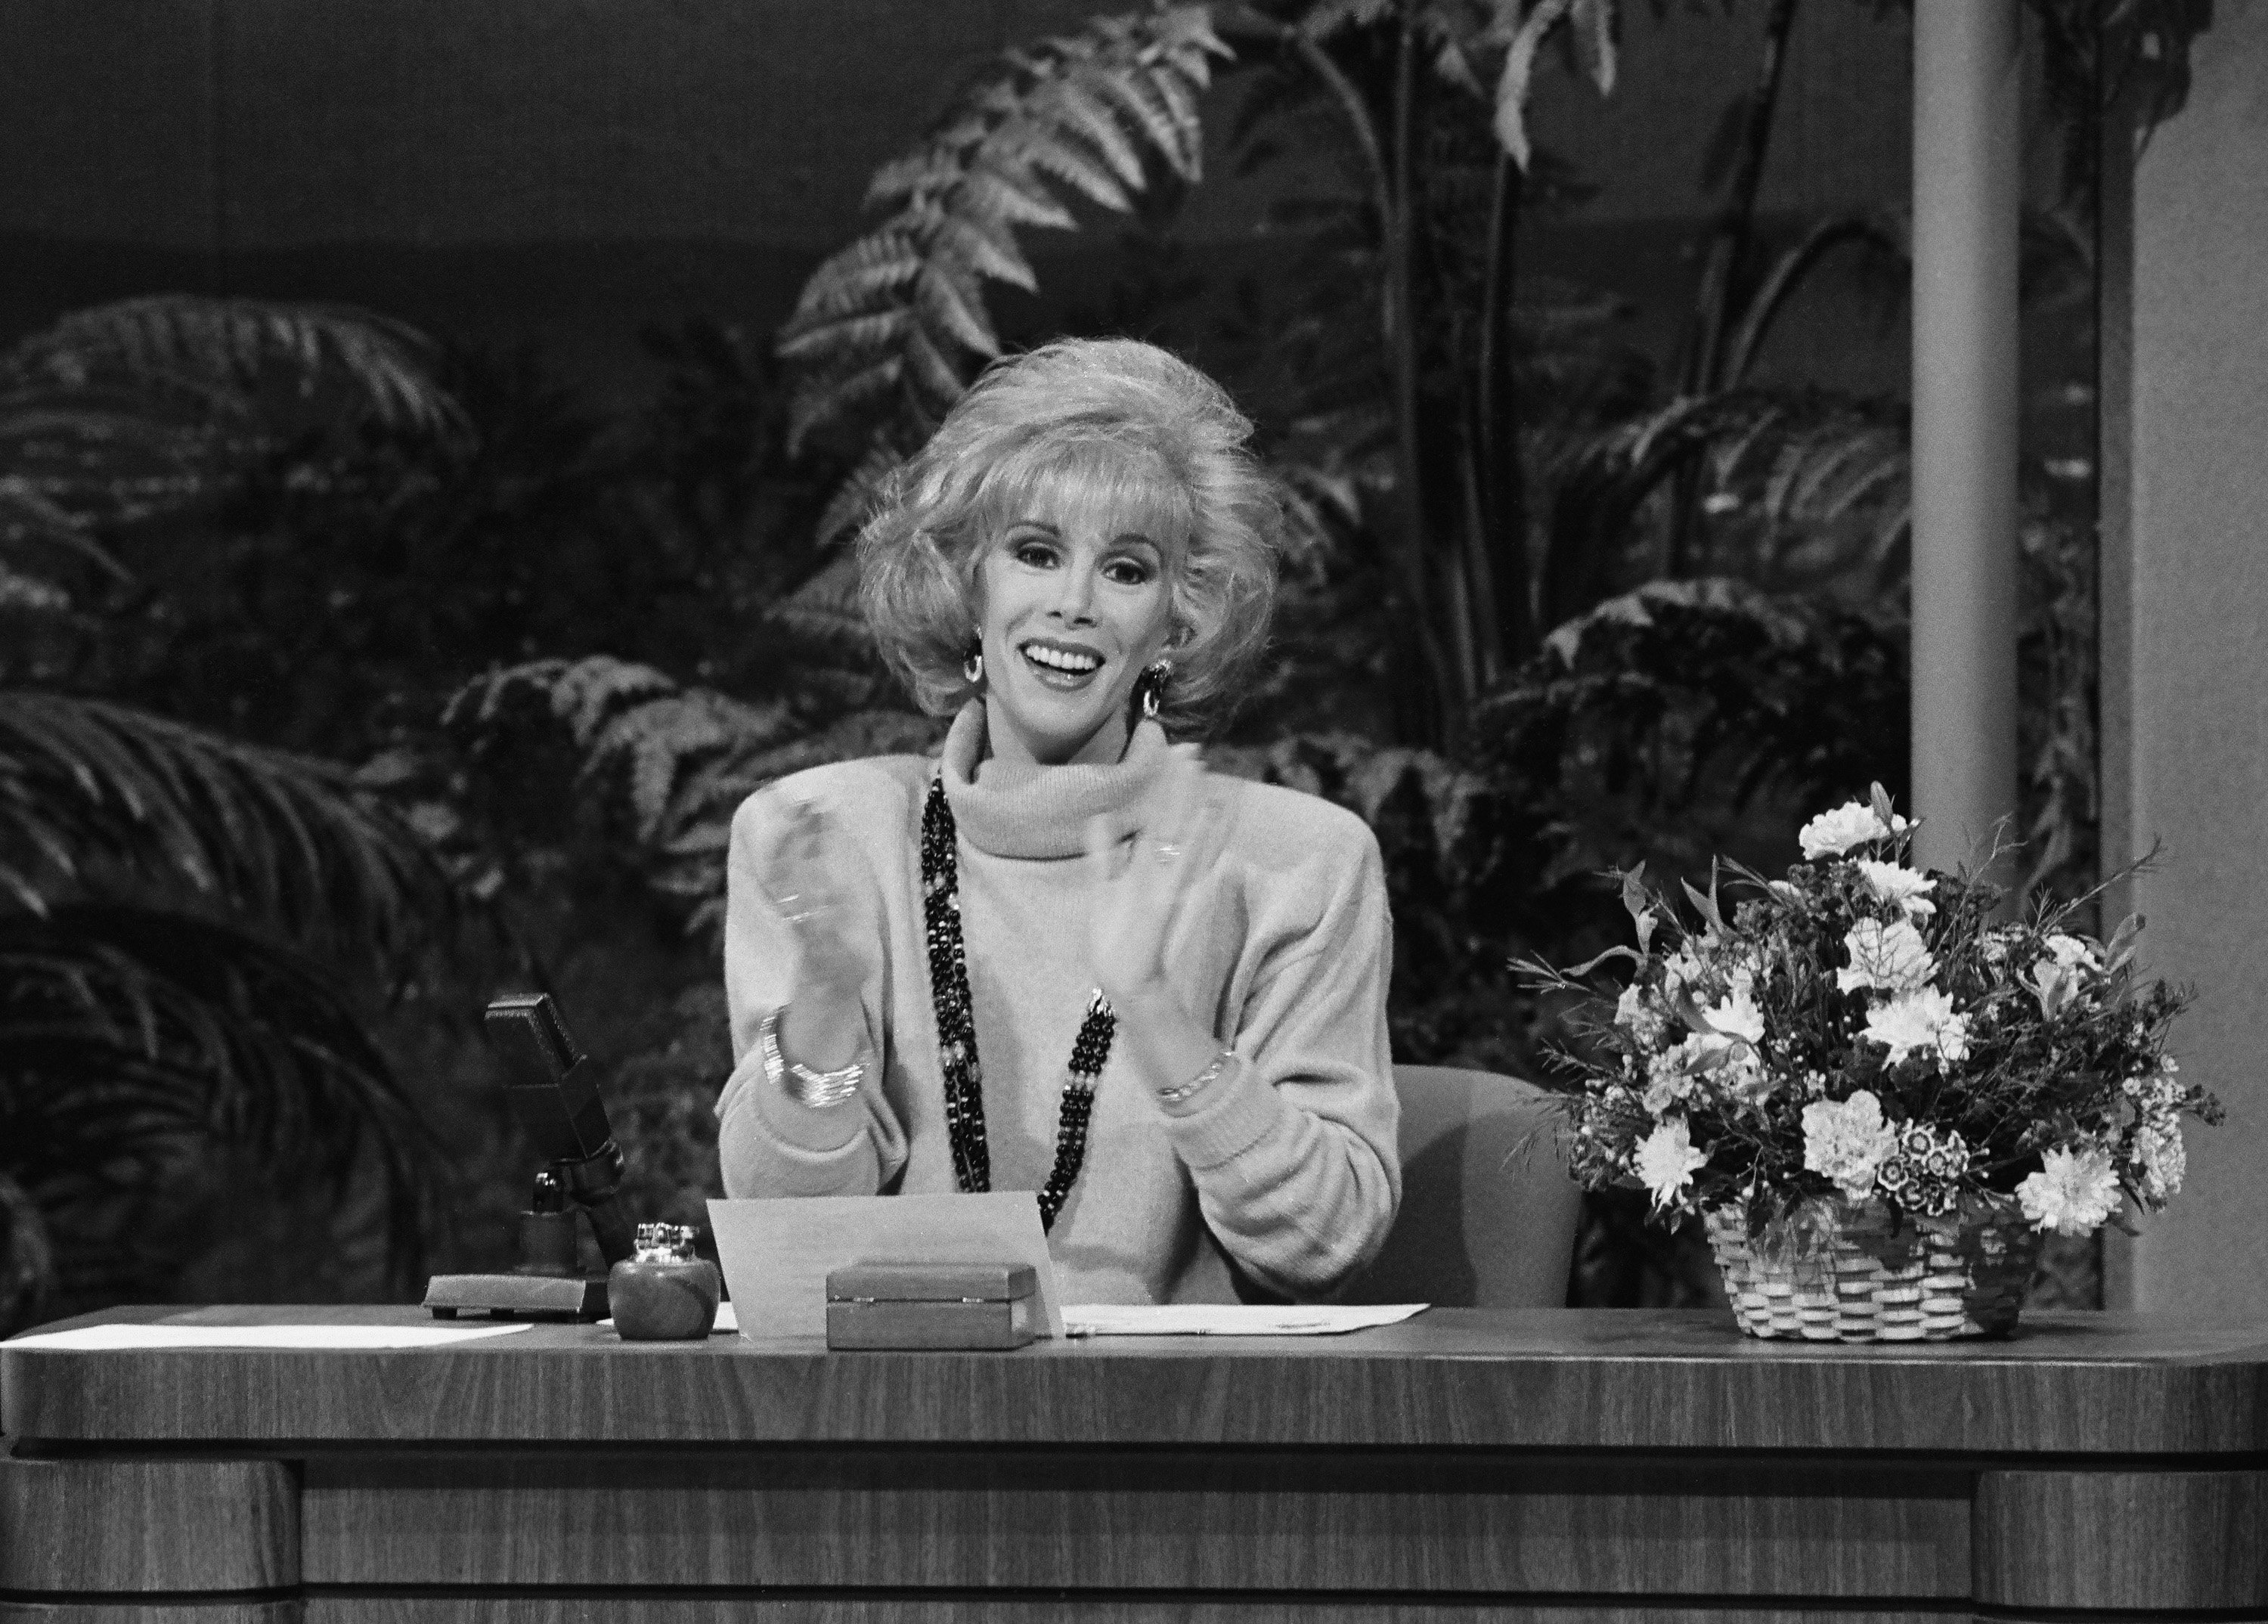 Joan Rivers on "The Tonight Show" in 1980. | Source: Getty Images